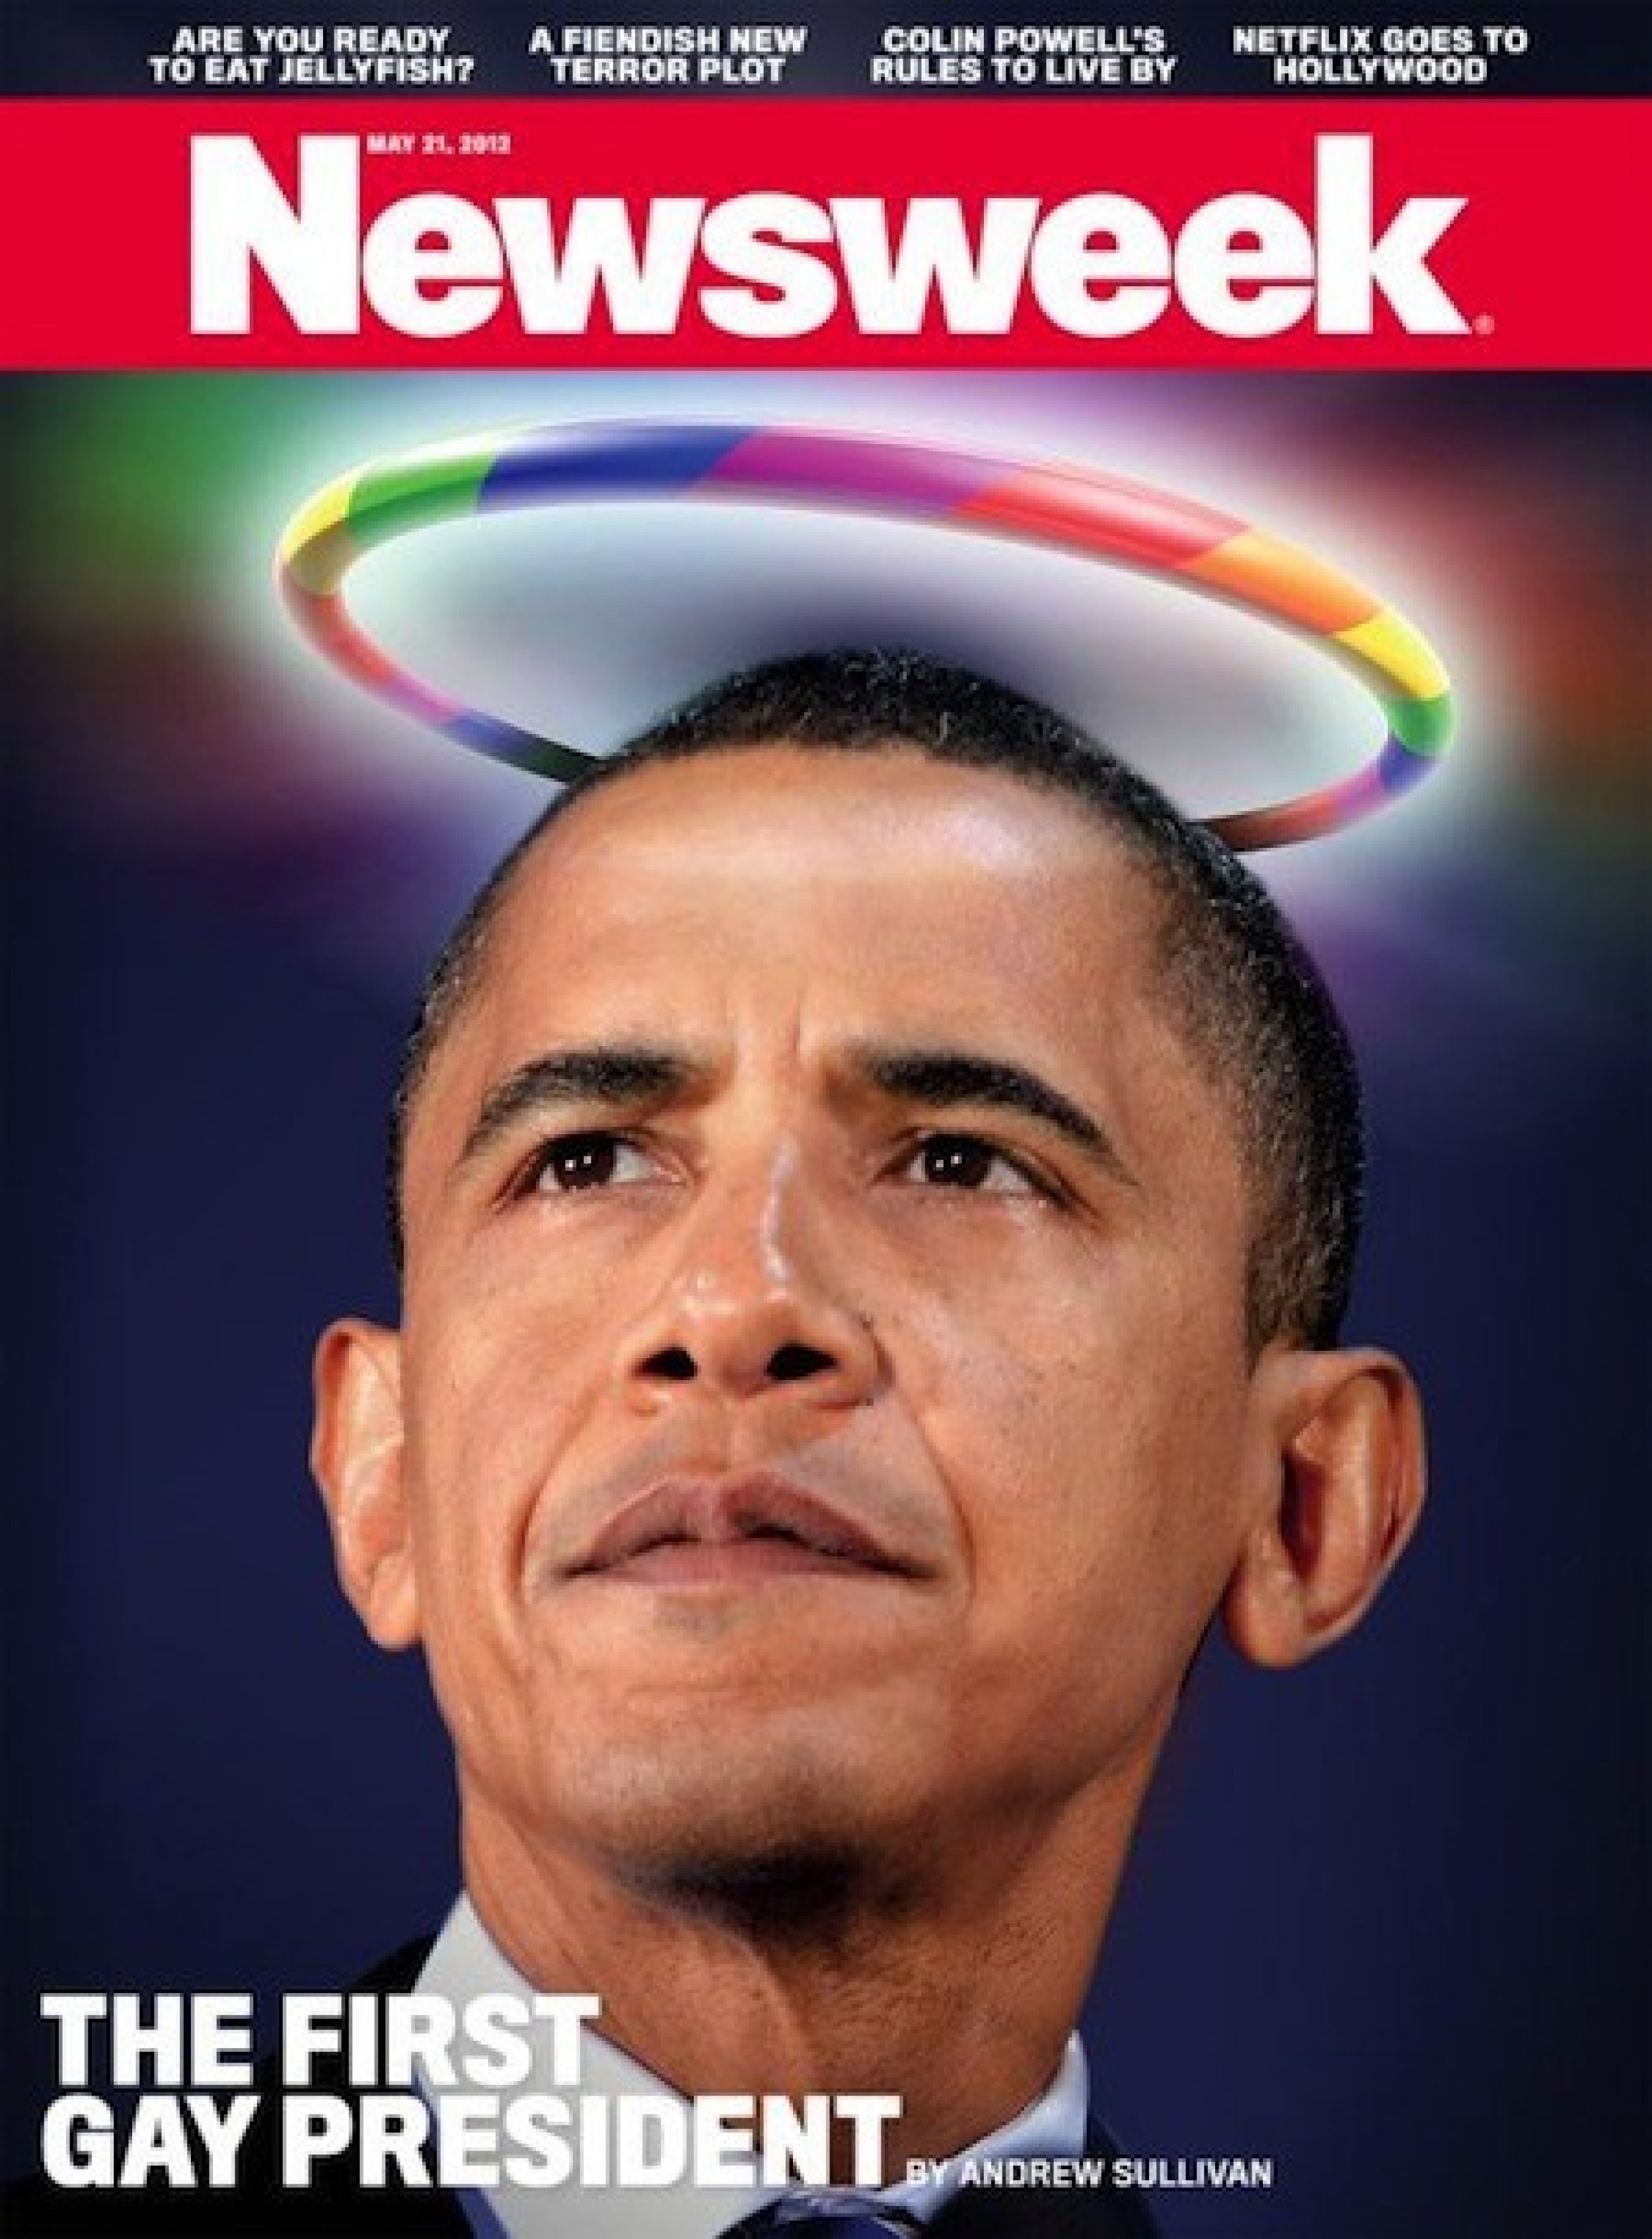 Obama 039First Gay President039 on Newsweek Cover PICTURE